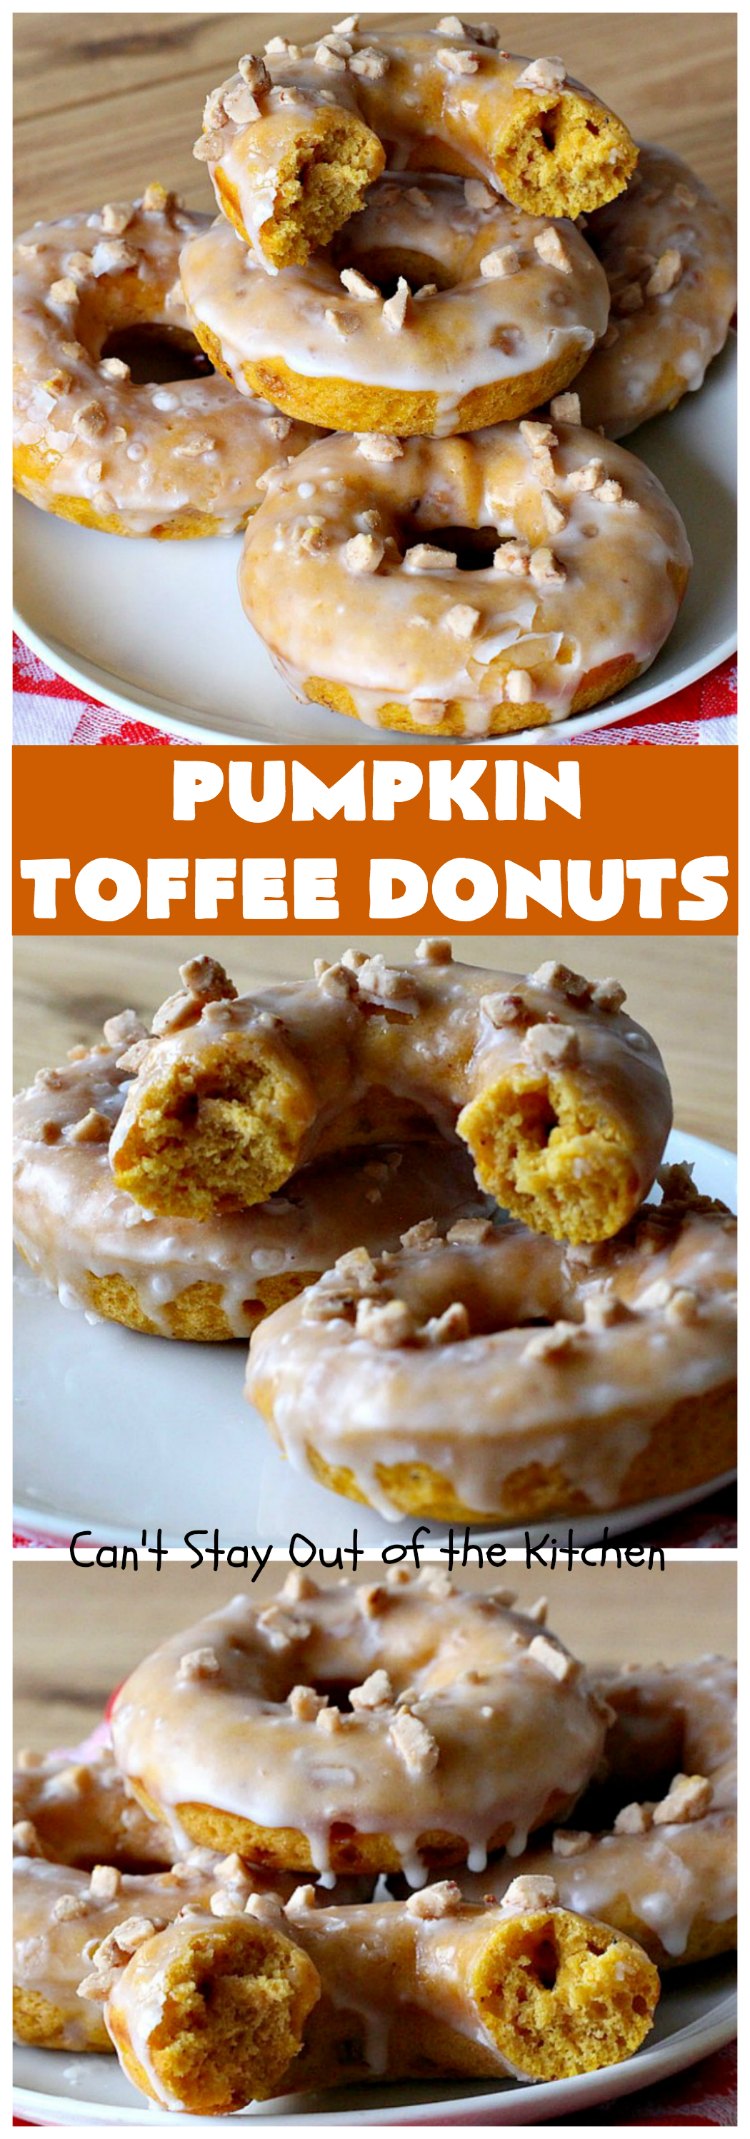 Pumpkin Toffee Donuts | Can't Stay Out of the Kitchen